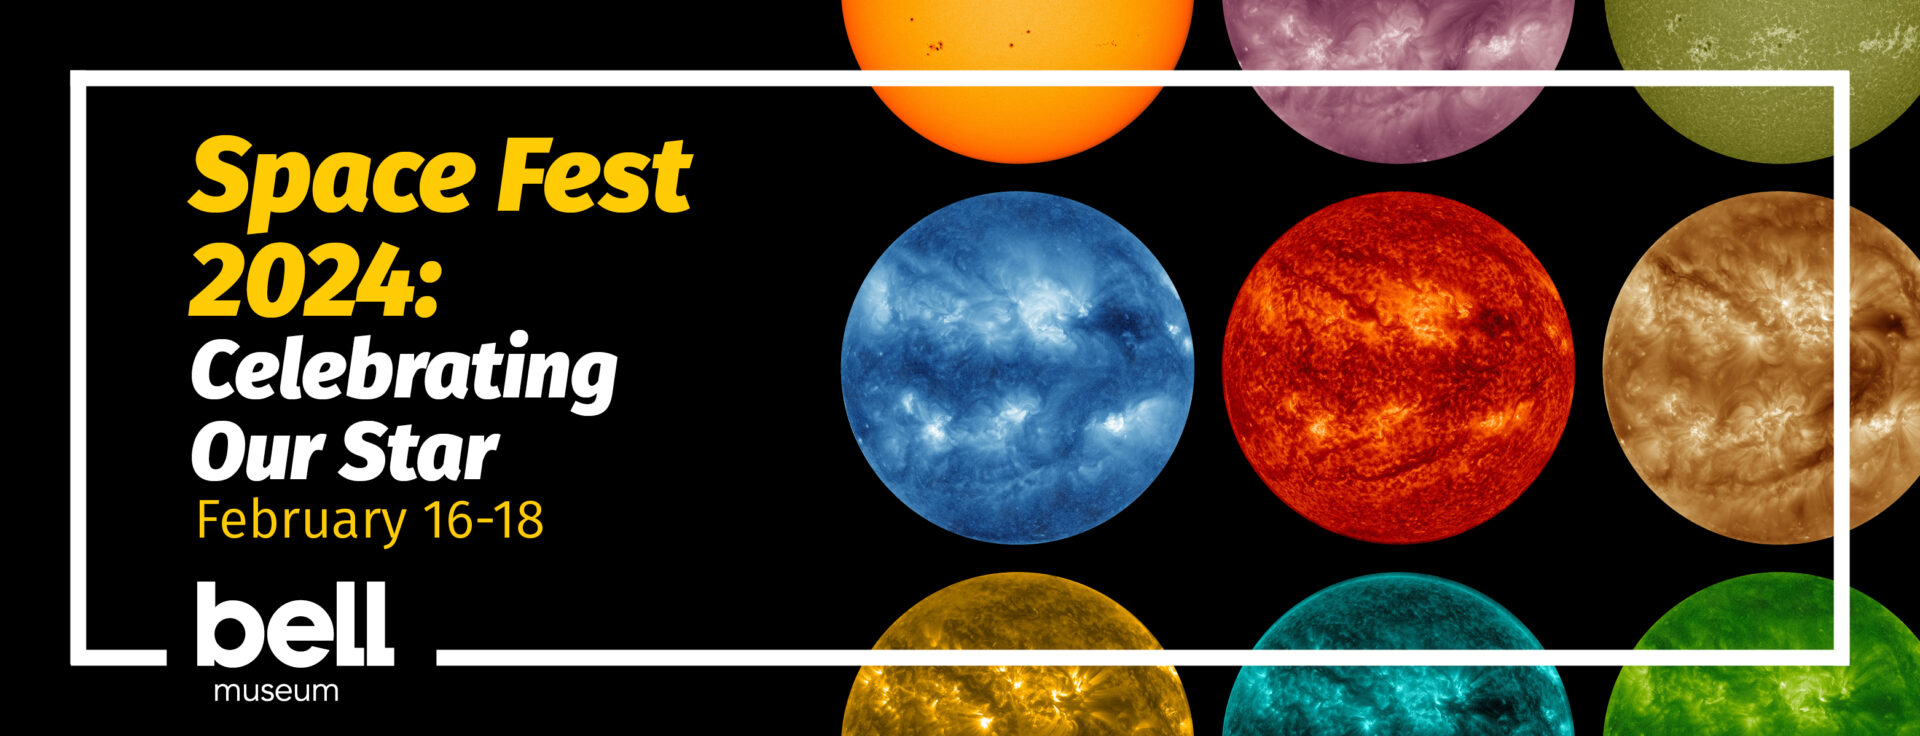 Different color suns with text: Space Fest 2024: Celebrating our Star